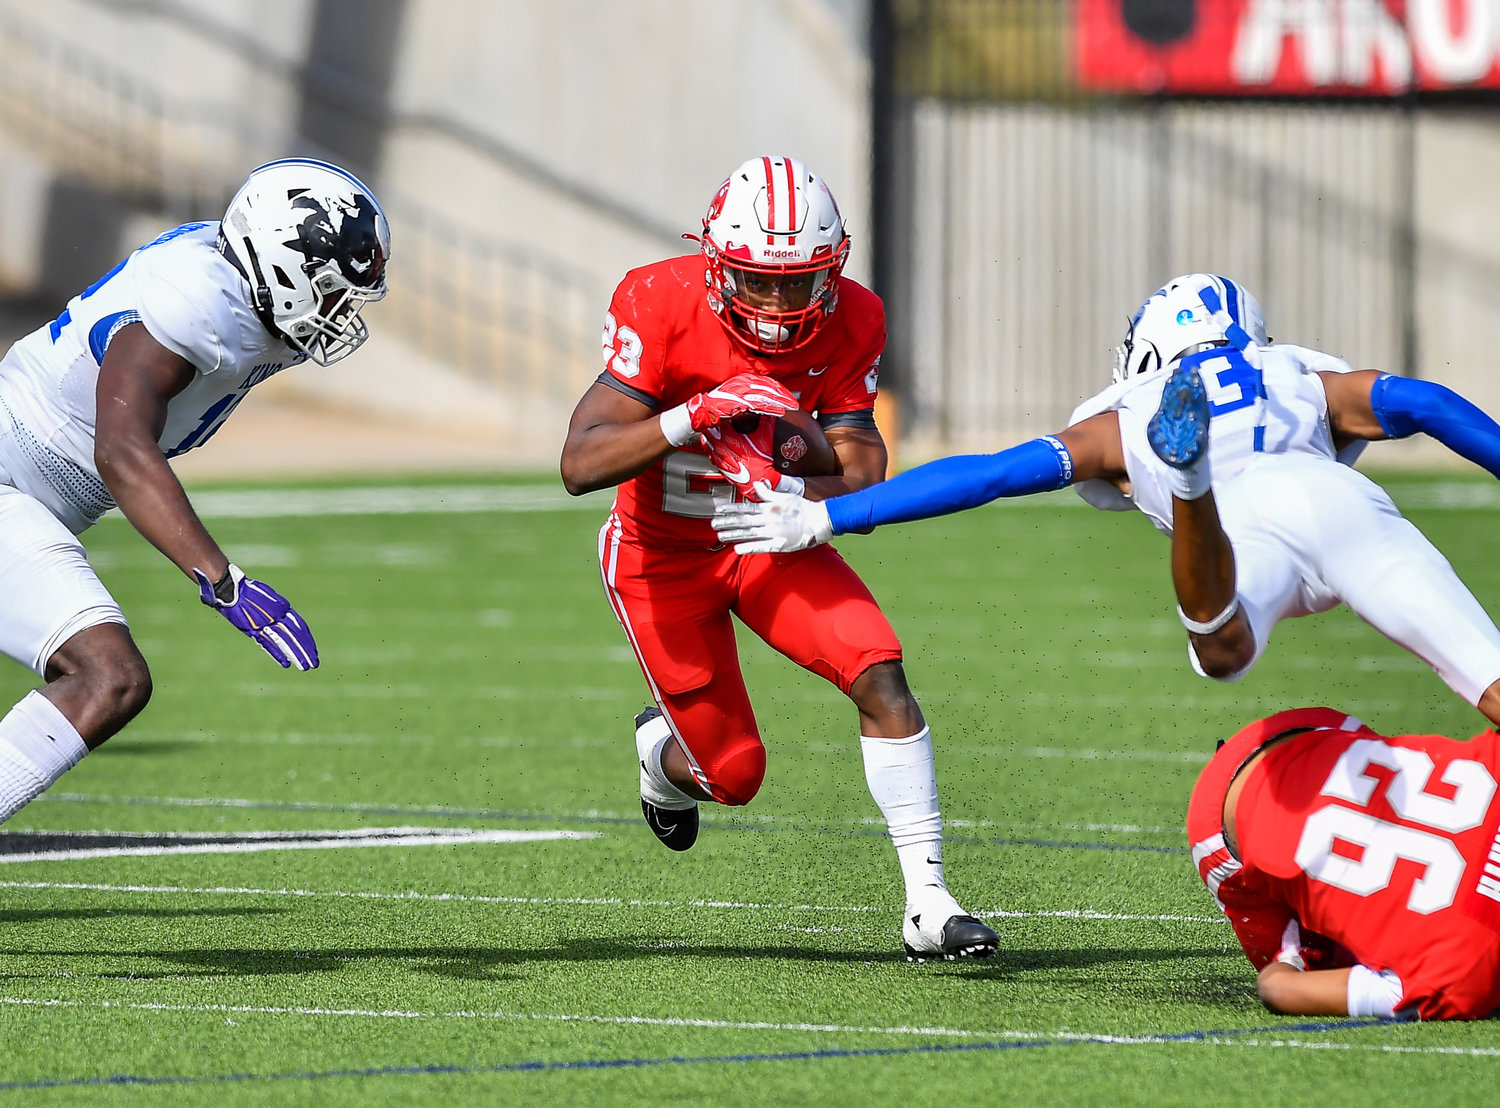 Katy Tx. Nov 26, 2021: Katy's #23 Seth Davis carries the ball picking up the first down during the UIL regional playoff game between Katy Tigers and King Panthers at Legacy Stadium in Katy. (Photo by Mark Goodman / Katy Times)